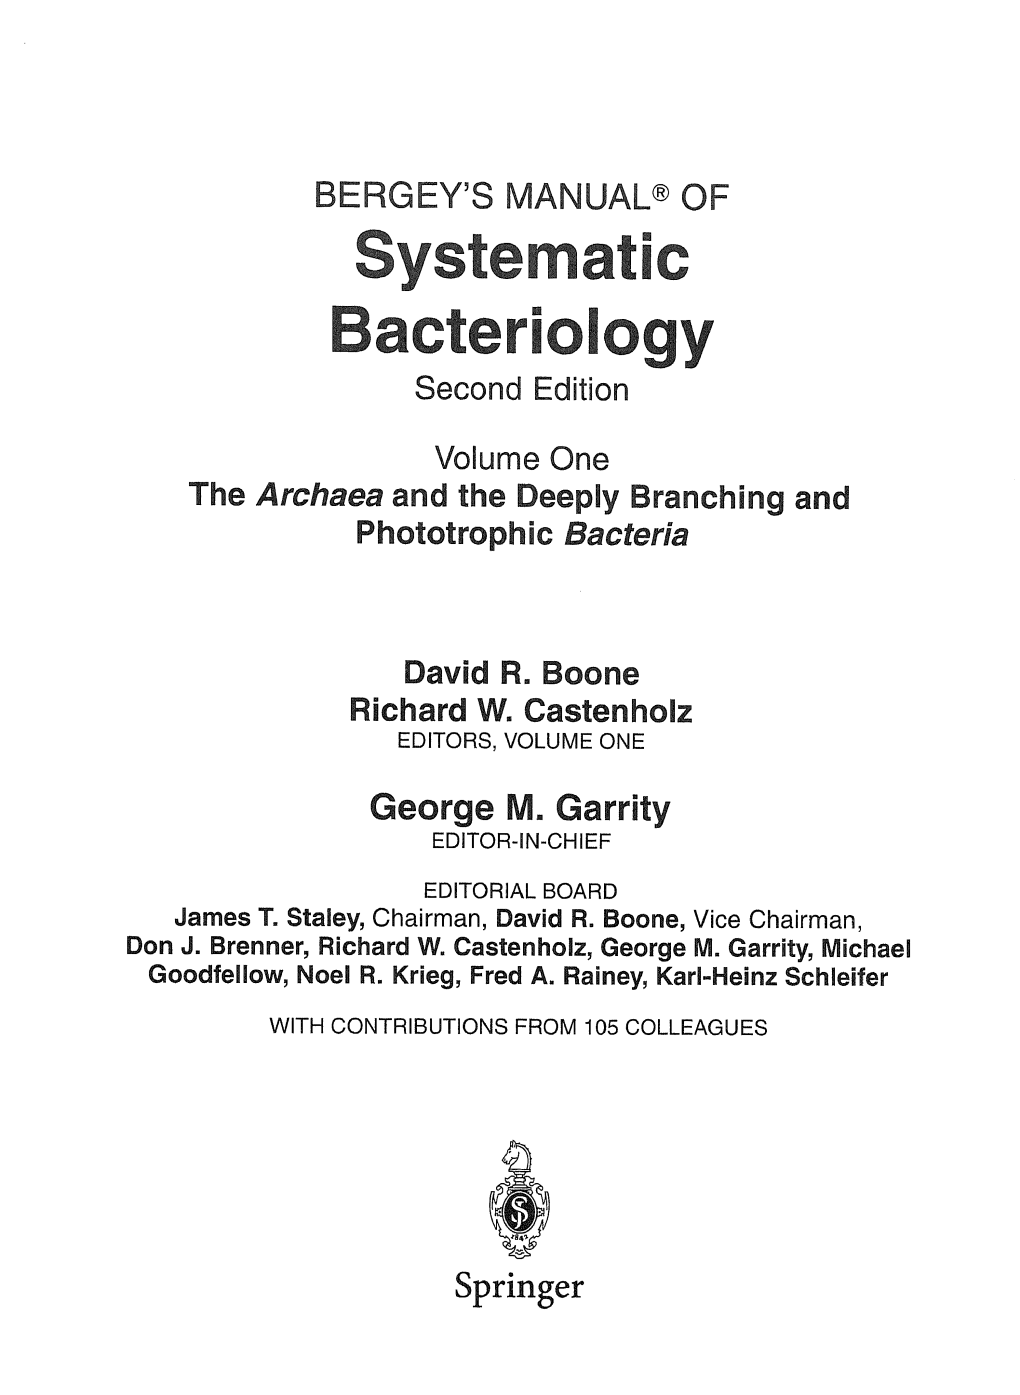 Bacteriology Second Edition